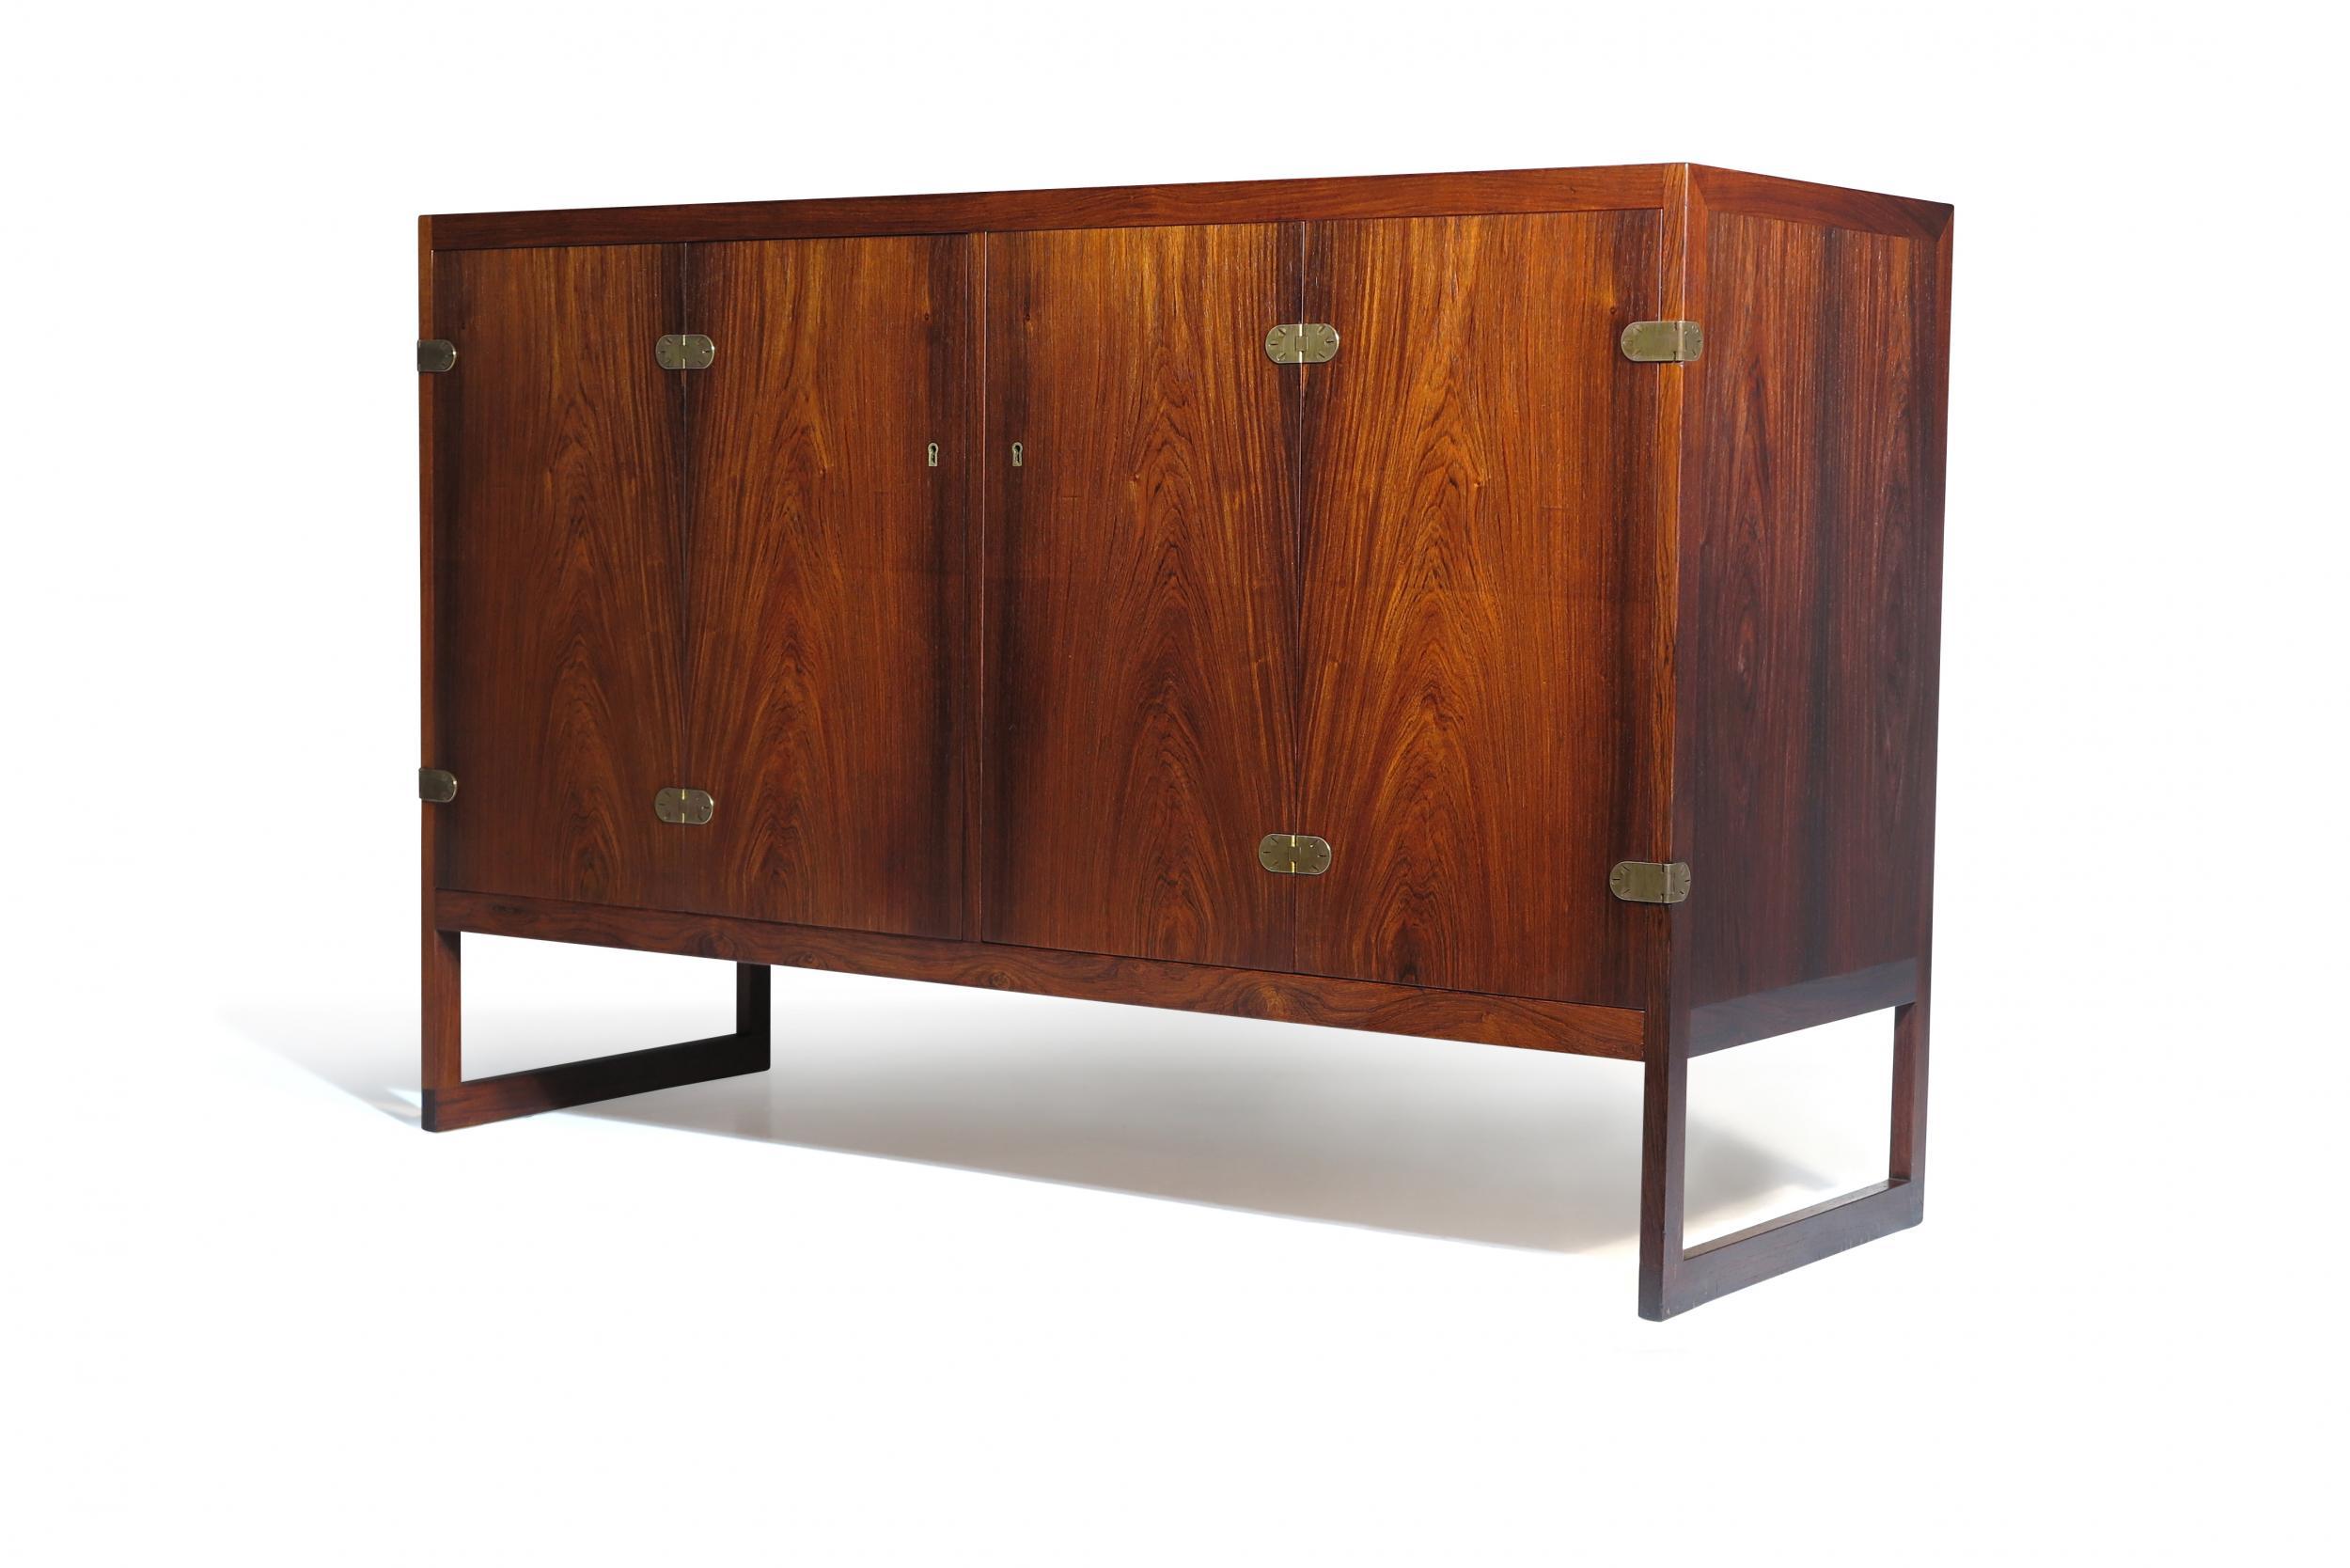 Pair of Scandinavian Rosewood Cabinets designed by Borge Mogensen for P. Lauritsen & Son Denmark, Model BM 57. The cabinets are crafted of dark Brazilian rosewood with brass hardware, oak interior with silverware drawers and adjustable shelves,